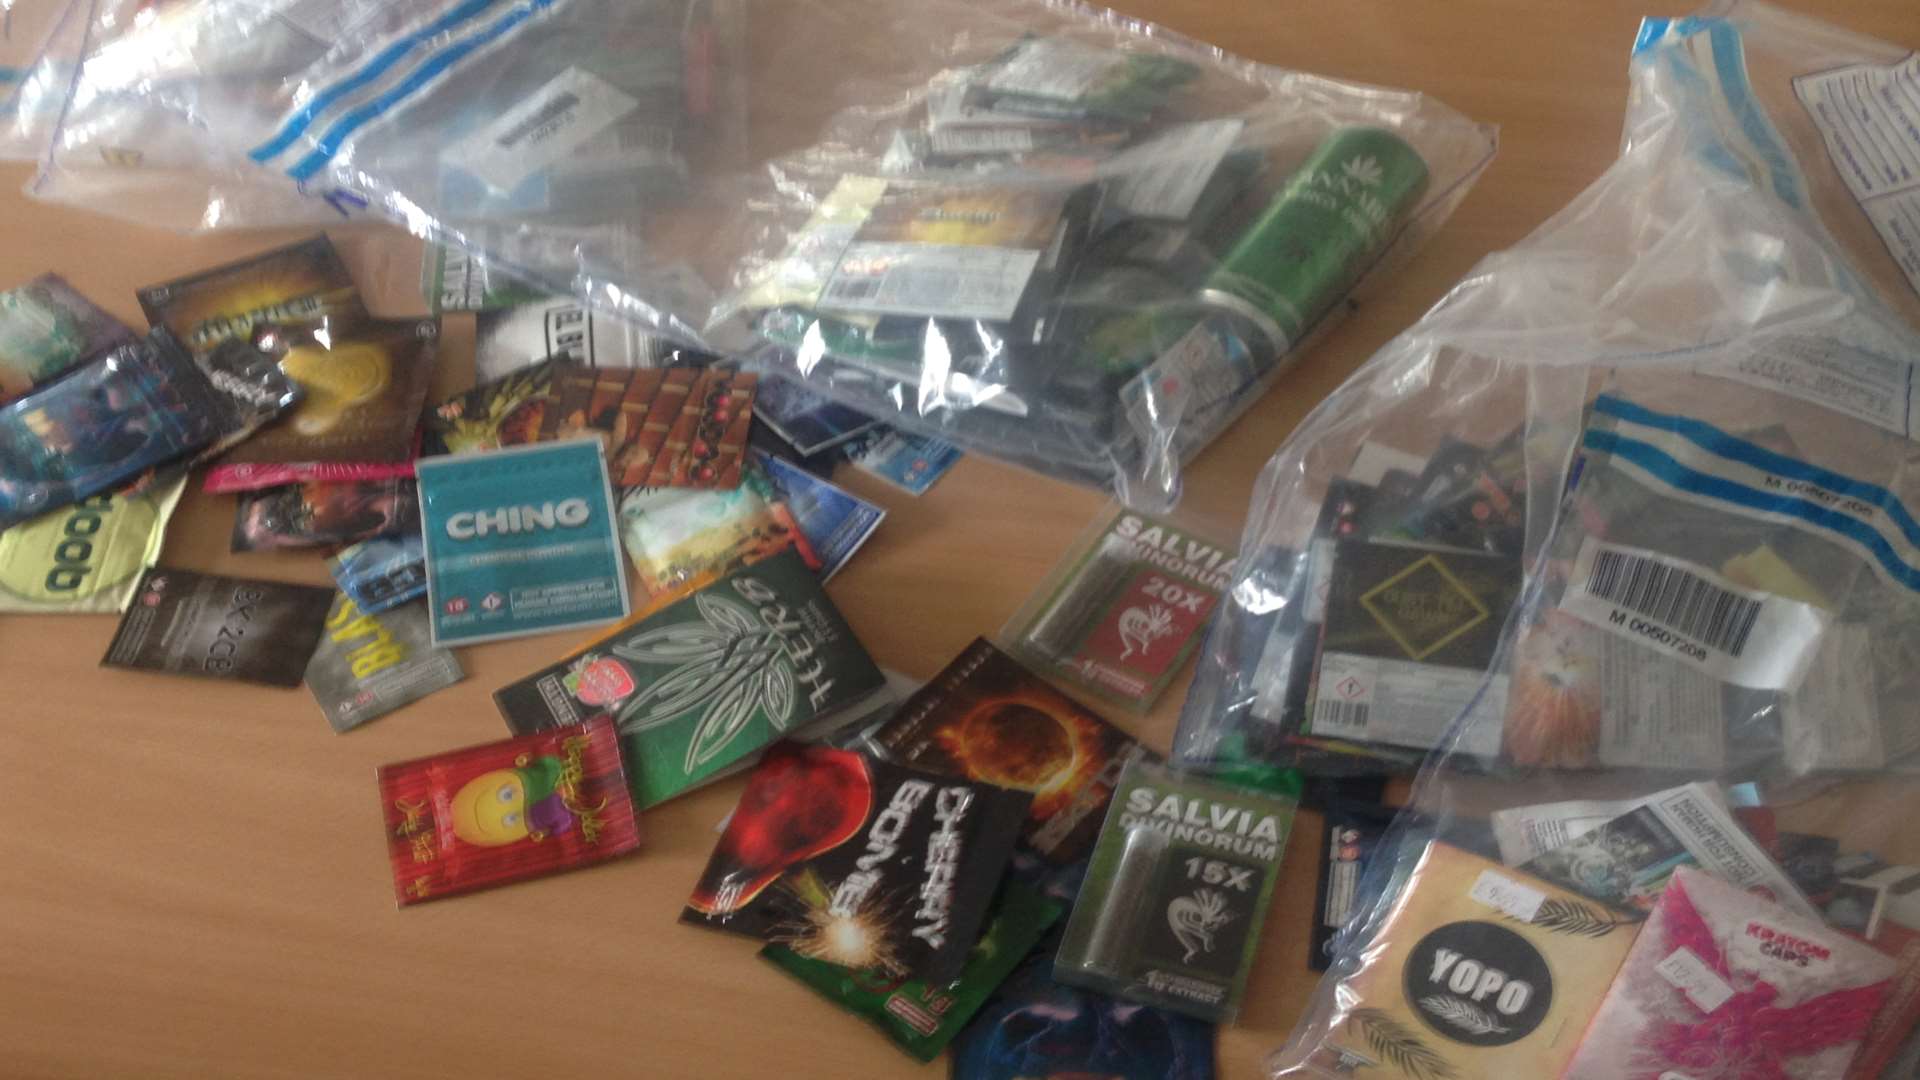 Some of the legal drugs seized in the raids